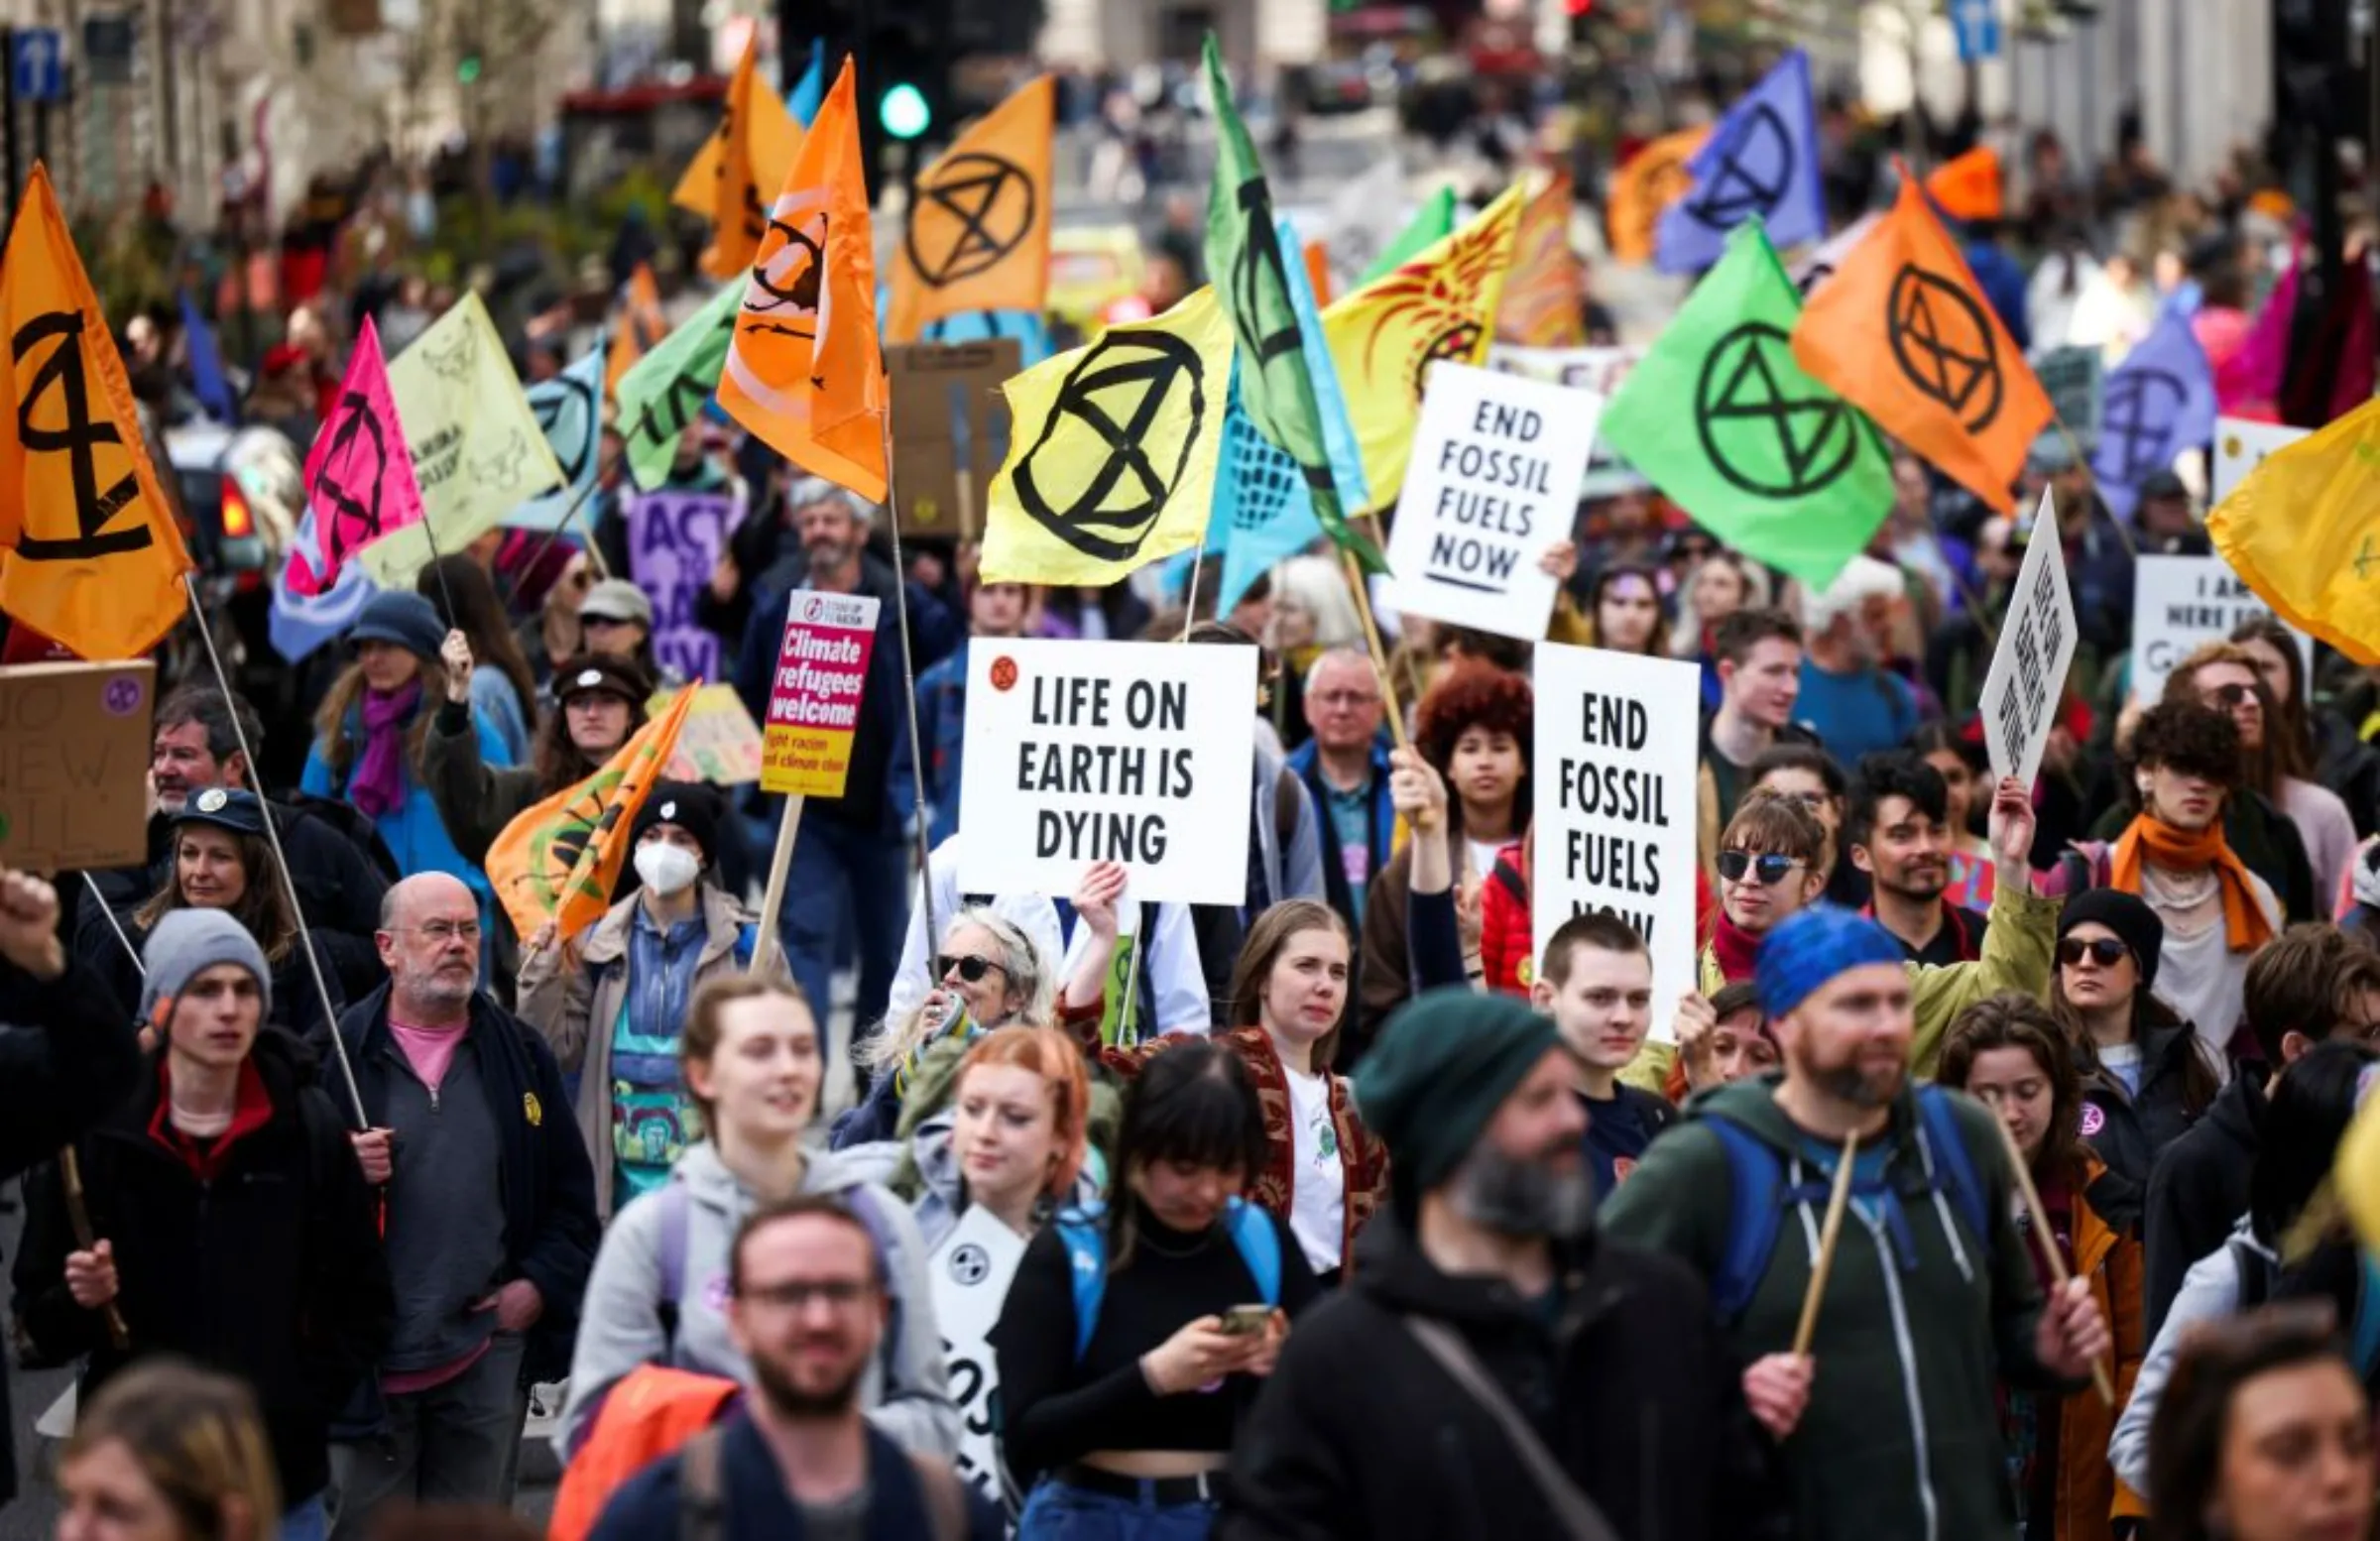 Climate activists from Extinction Rebellion carry flags and placards as they take part in a demonstration in London, Britain, April 9, 2022